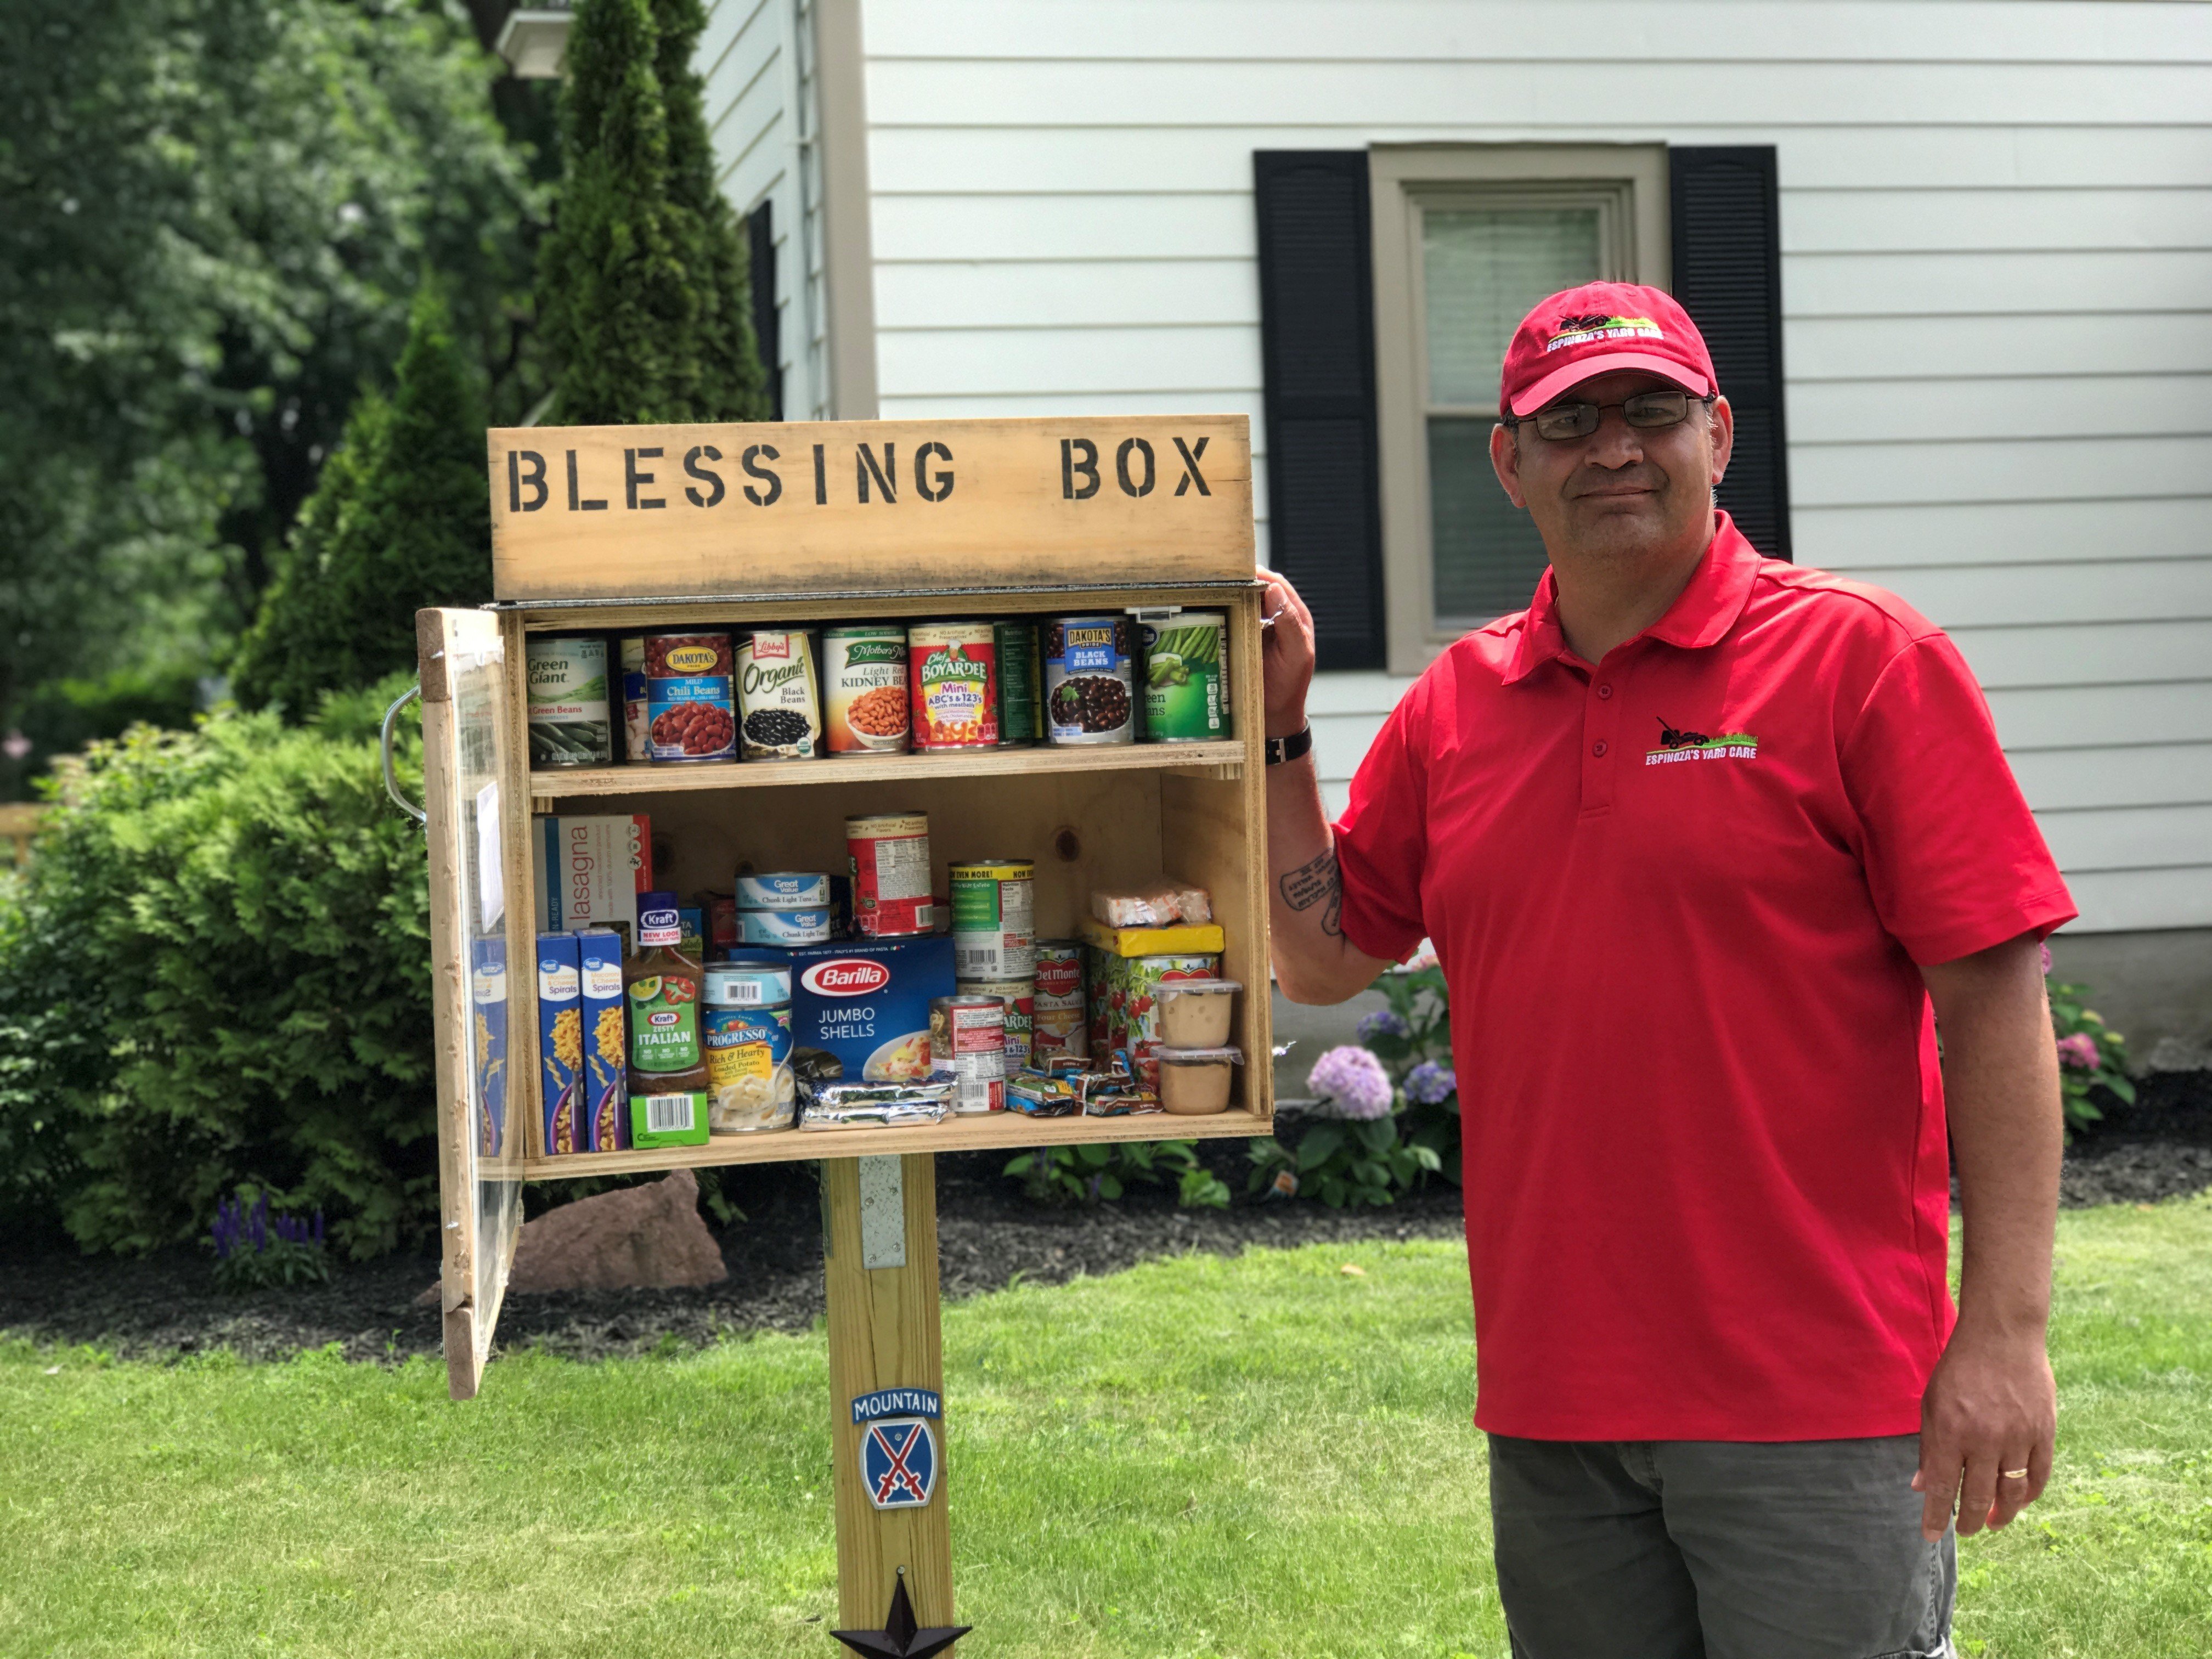 The concept is simple. The box is a miniature food pantry -- receiving items from those who want to donate, and offering it to those who need them.